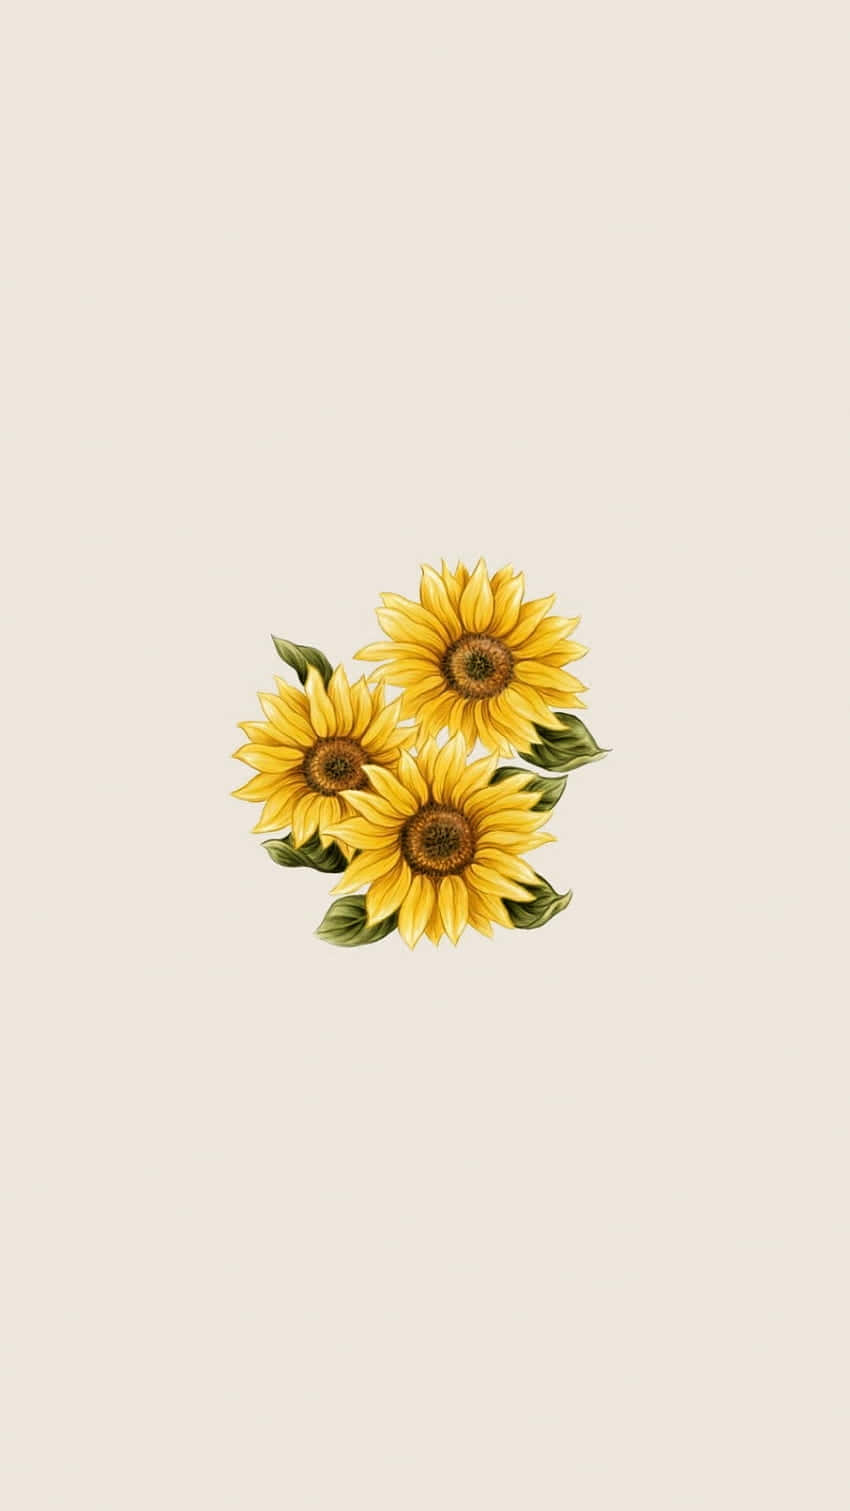 "Embrace the brightness of the sun with this beautiful sunflower aesthetic iPhone wallpaper." Wallpaper